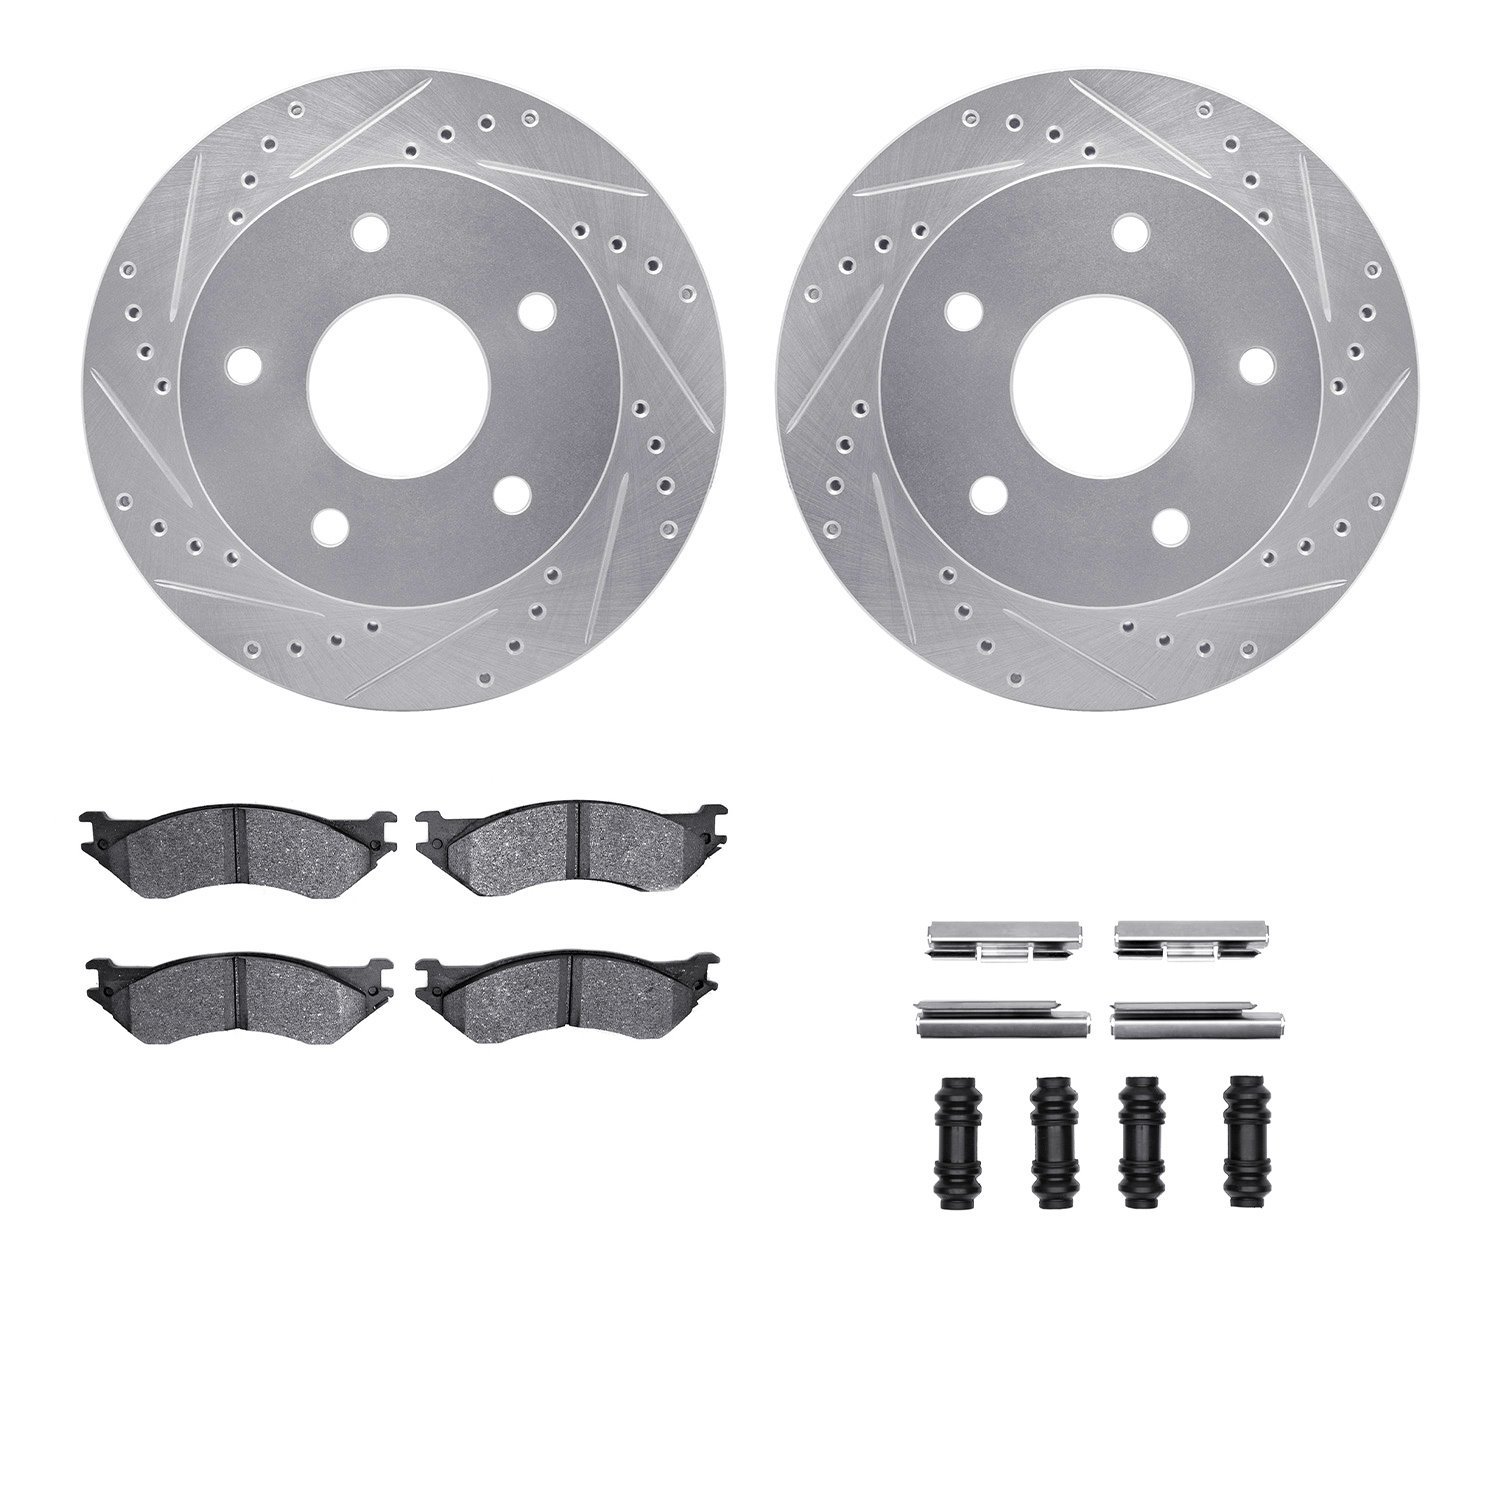 7412-40007 Drilled/Slotted Brake Rotors with Ultimate-Duty Brake Pads Kit & Hardware [Silver], 2000-2001 Mopar, Position: Front